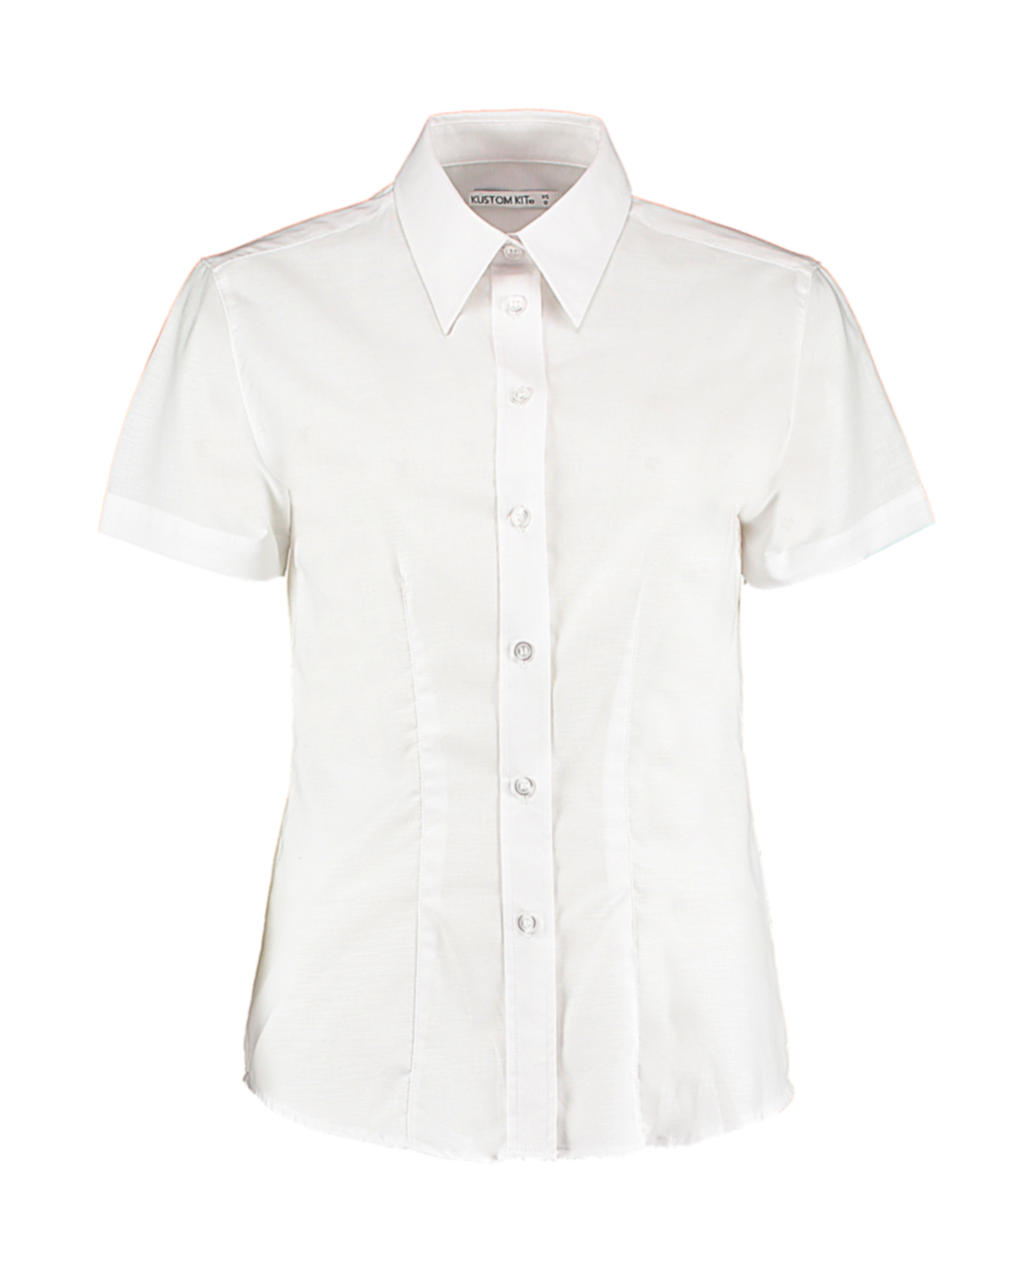  Womens Tailored Fit Workwear Oxford Shirt SSL in Farbe White